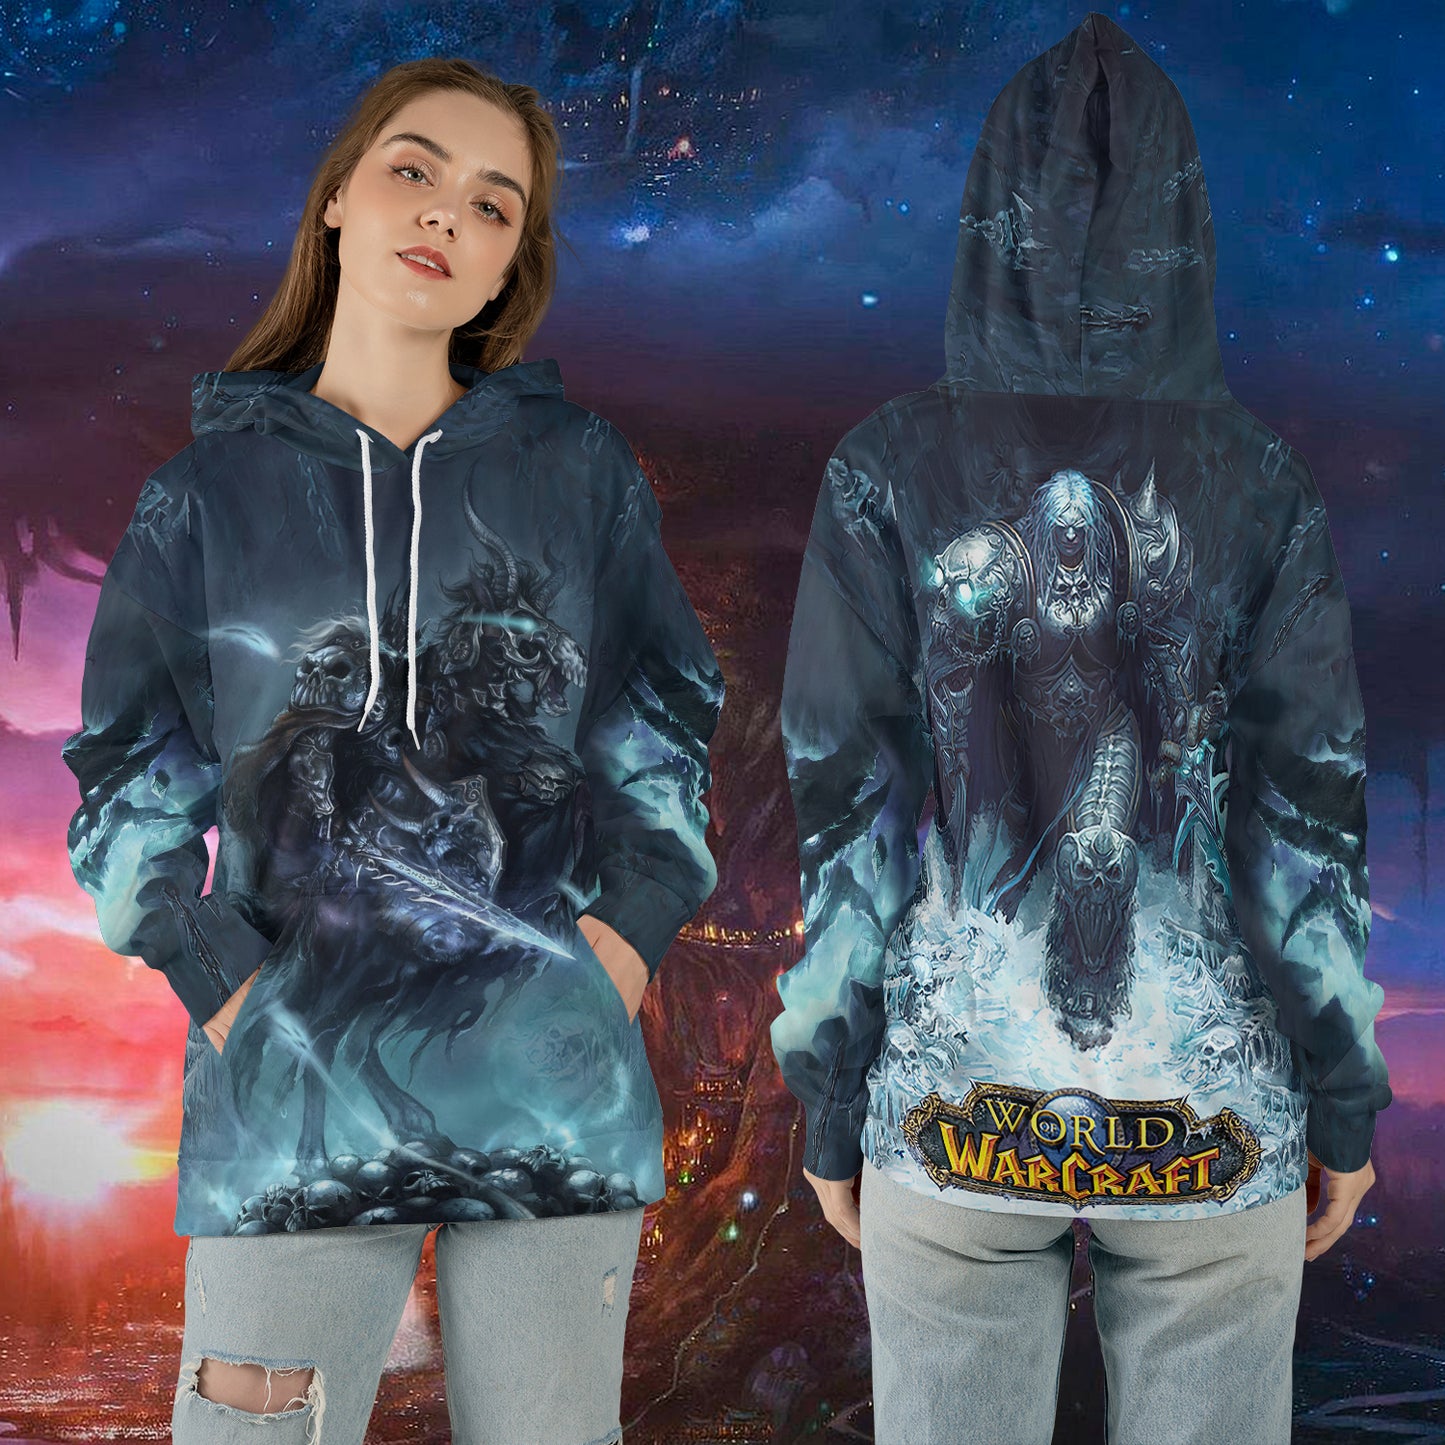 Lich King - Lord of the Scourge V7 WoW AOP Hoodie